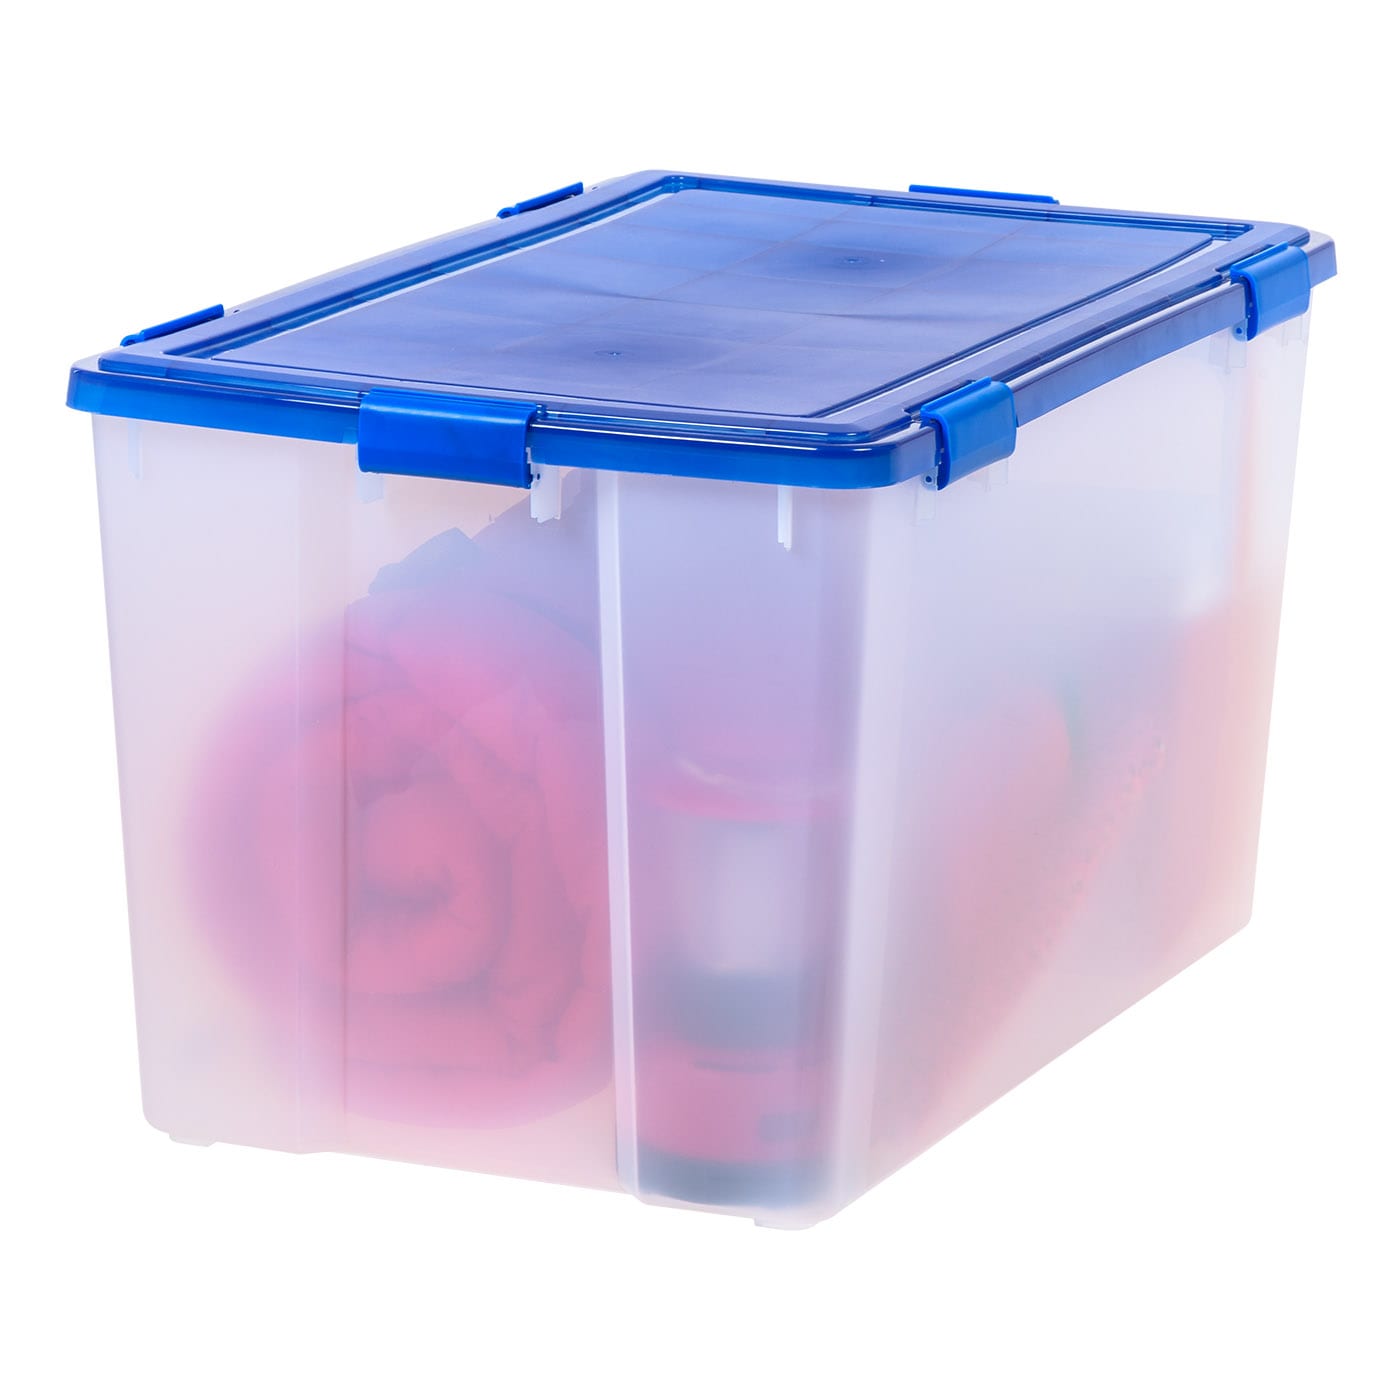 ESD-Safe Tote Box Containers: Inside:20.3x15.3x8.0, Black, 4